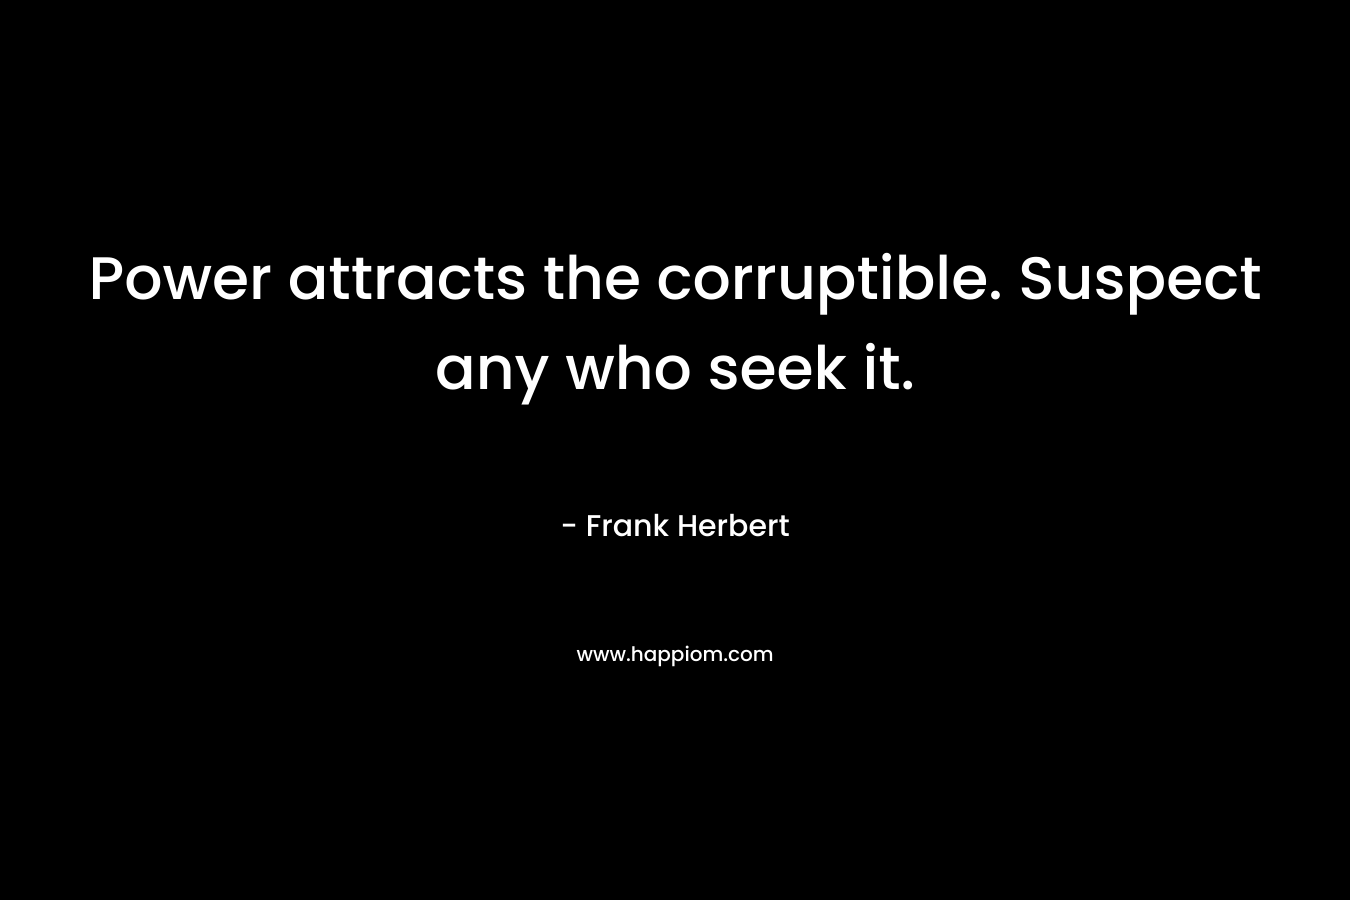 Power attracts the corruptible. Suspect any who seek it.